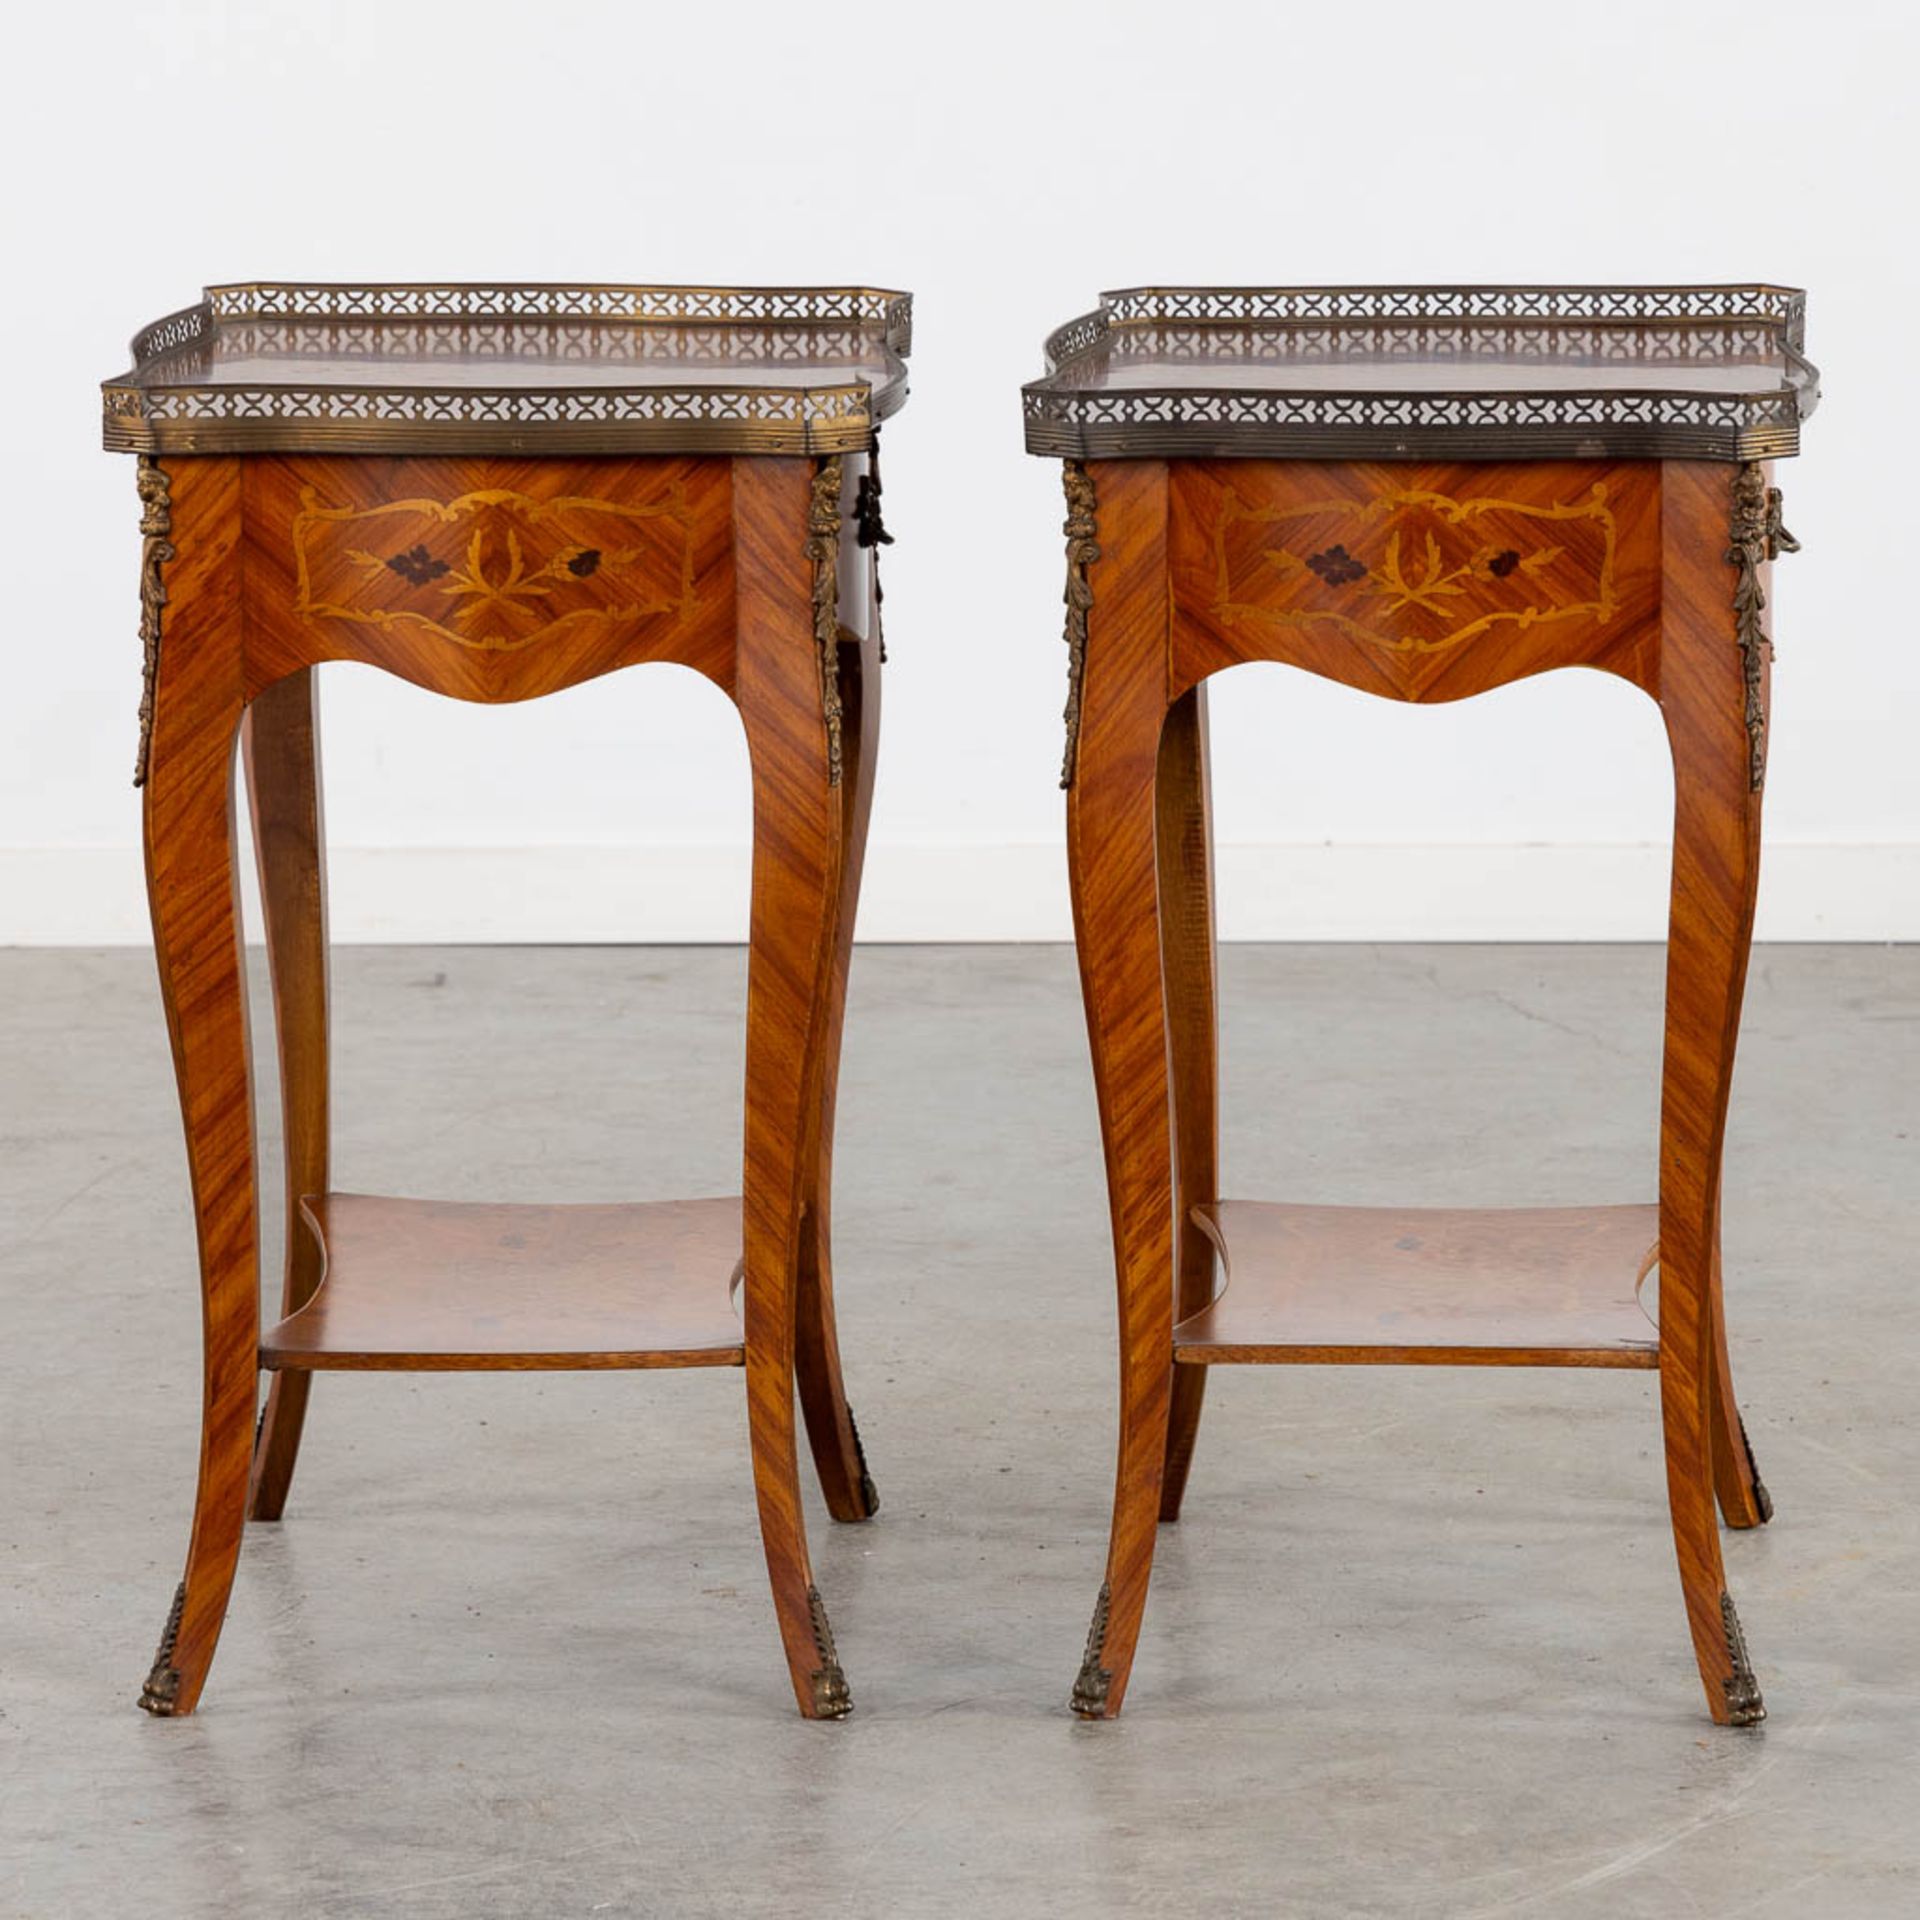 A pair of side tables, marquetry inlay and mounted with bronze. (L:37 x W:51 x H:65 cm) - Bild 7 aus 13